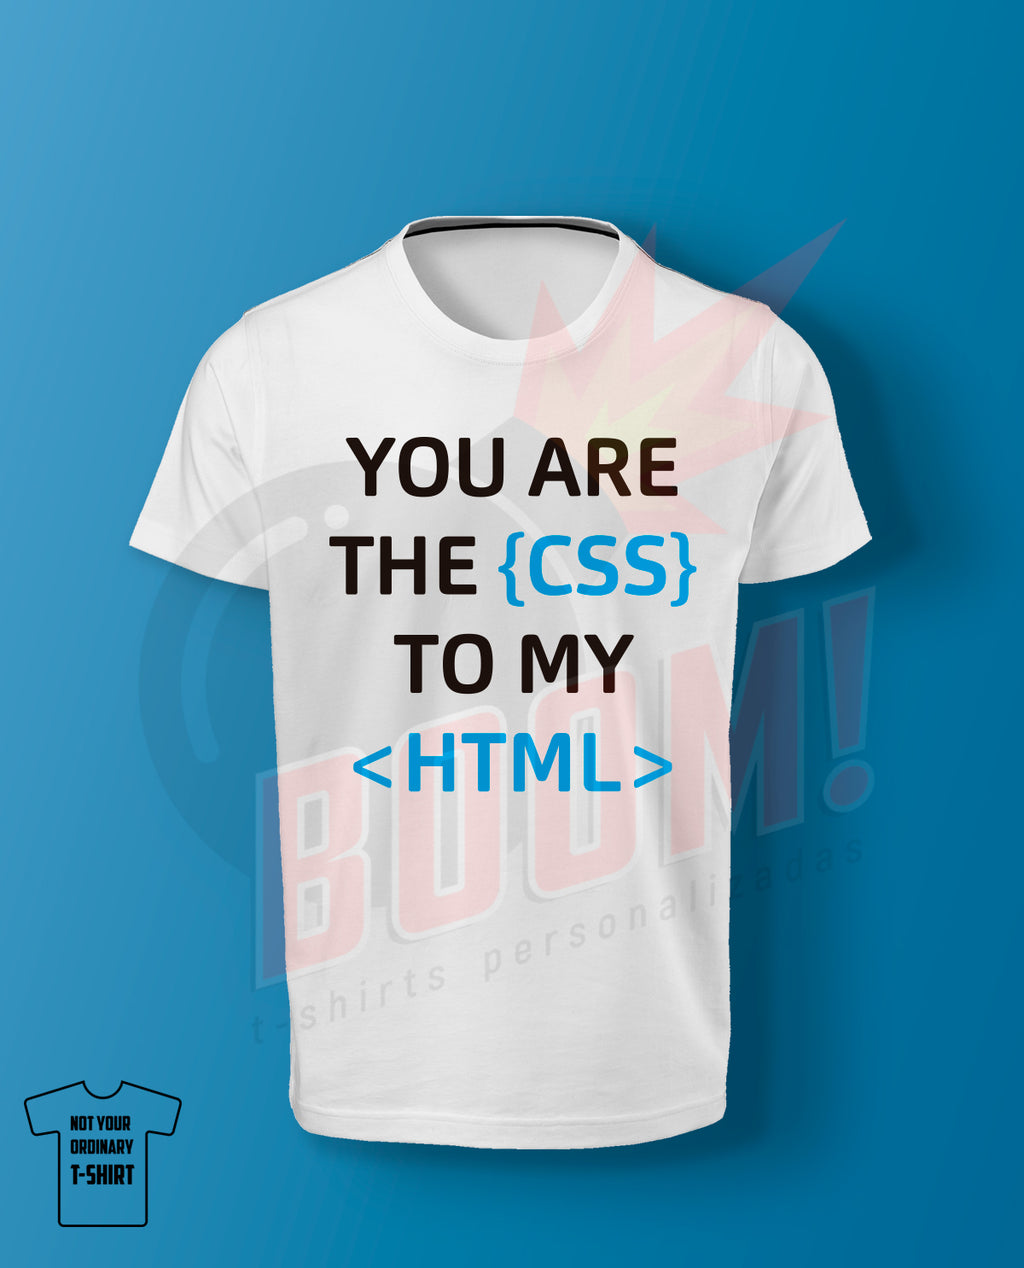 You are the CSS to my HMTL (BLUE)